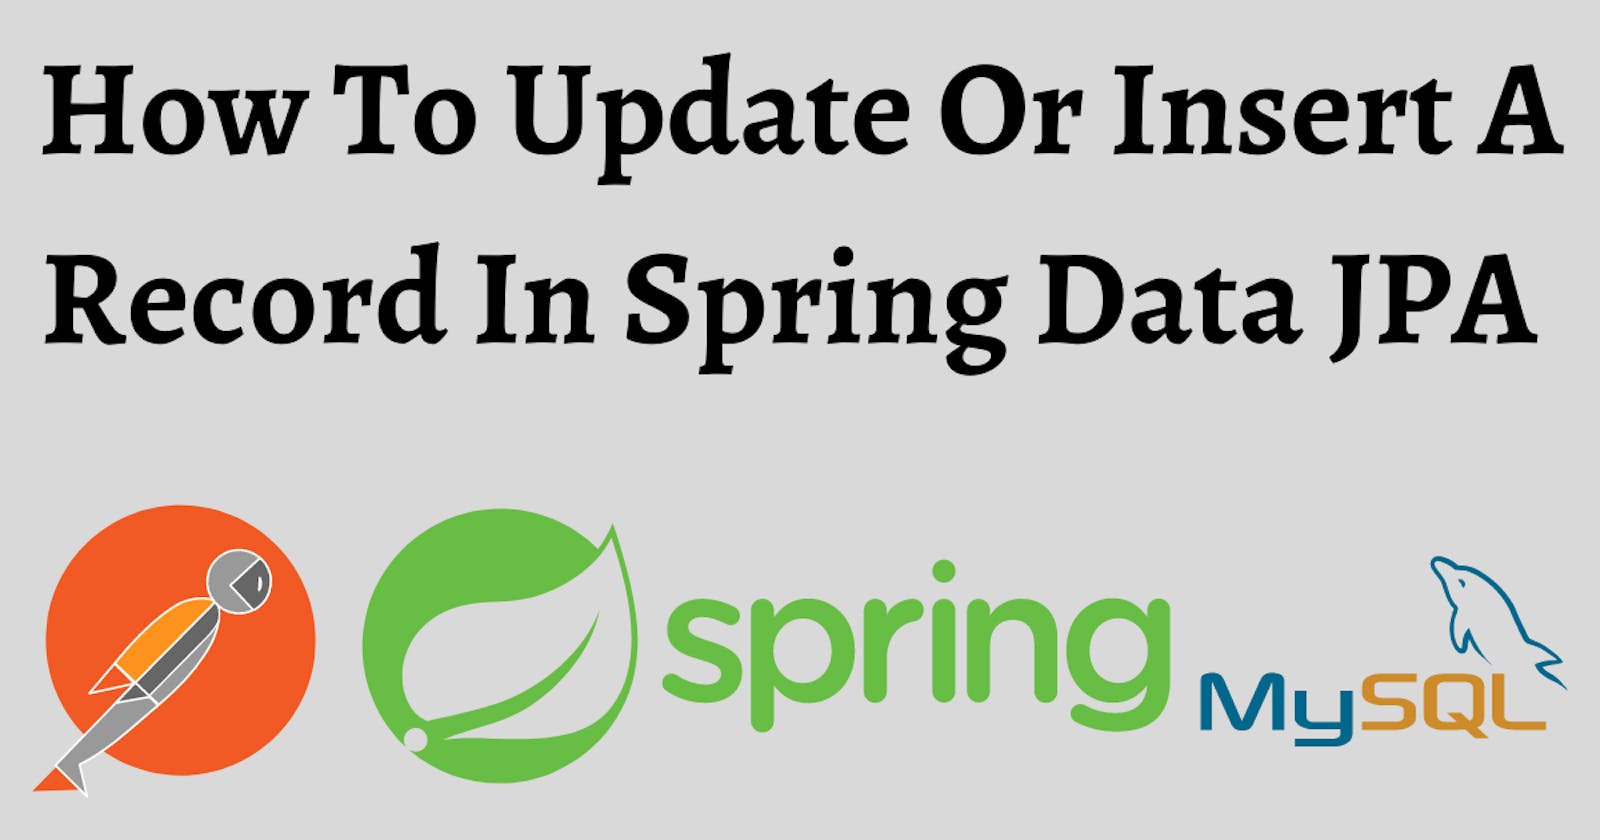 How To Update Or Insert A Record In Spring Data JPA